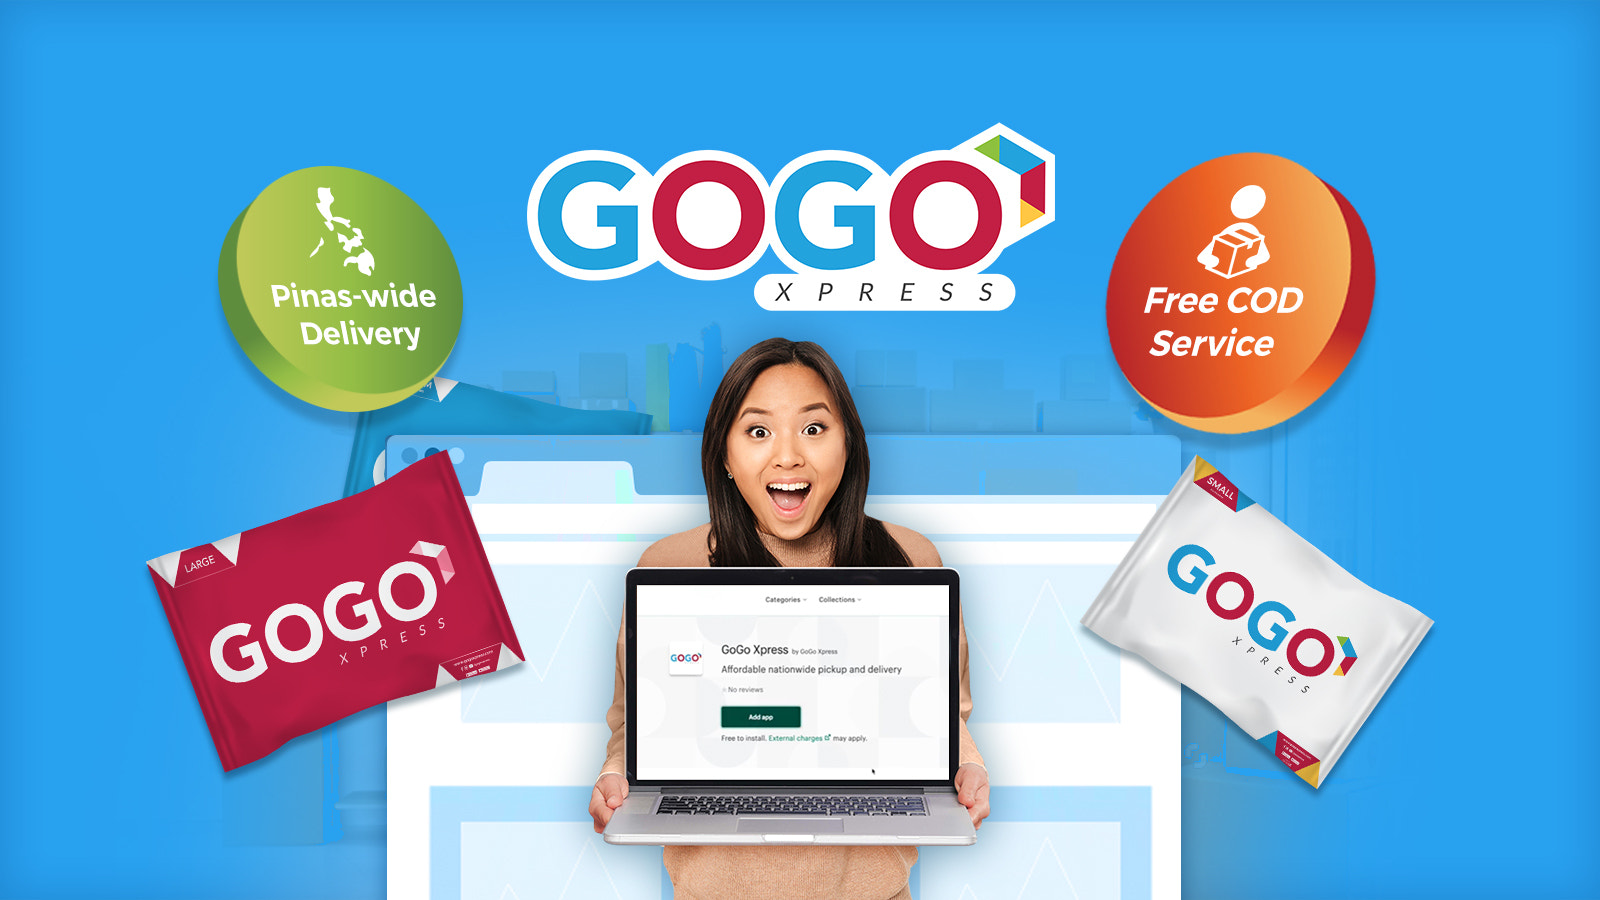 GoGo Xpress - Affordable nationwide pickup and delivery | Shopify App Store